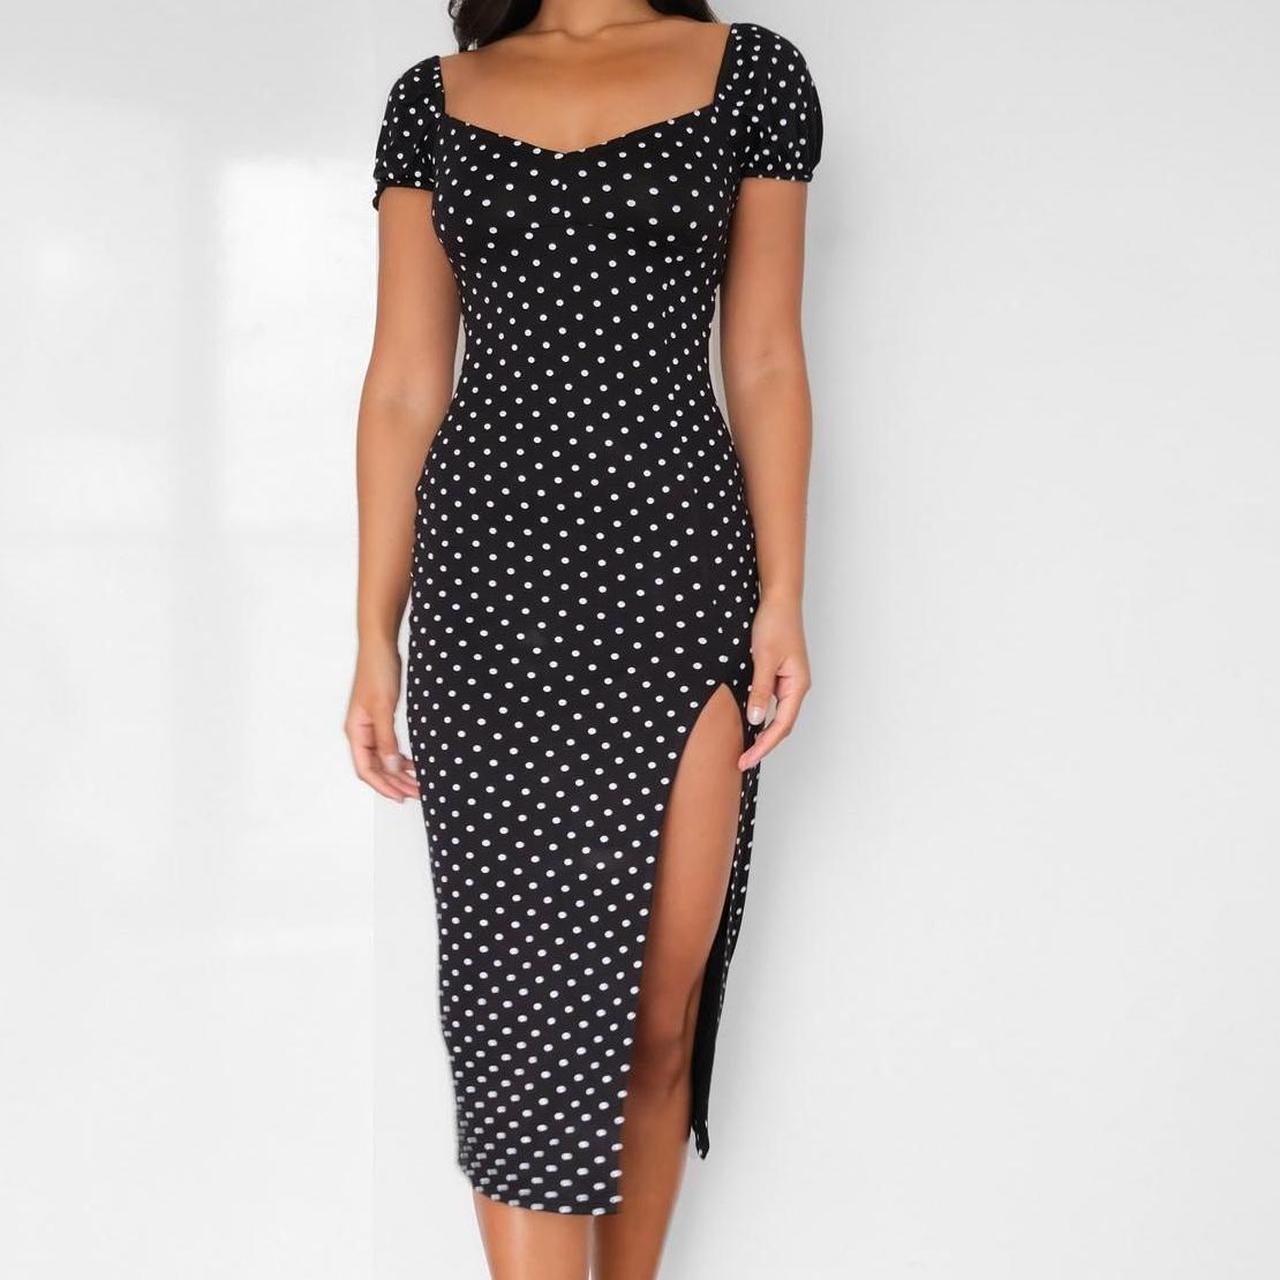 Missguided Women's Black and White Dress